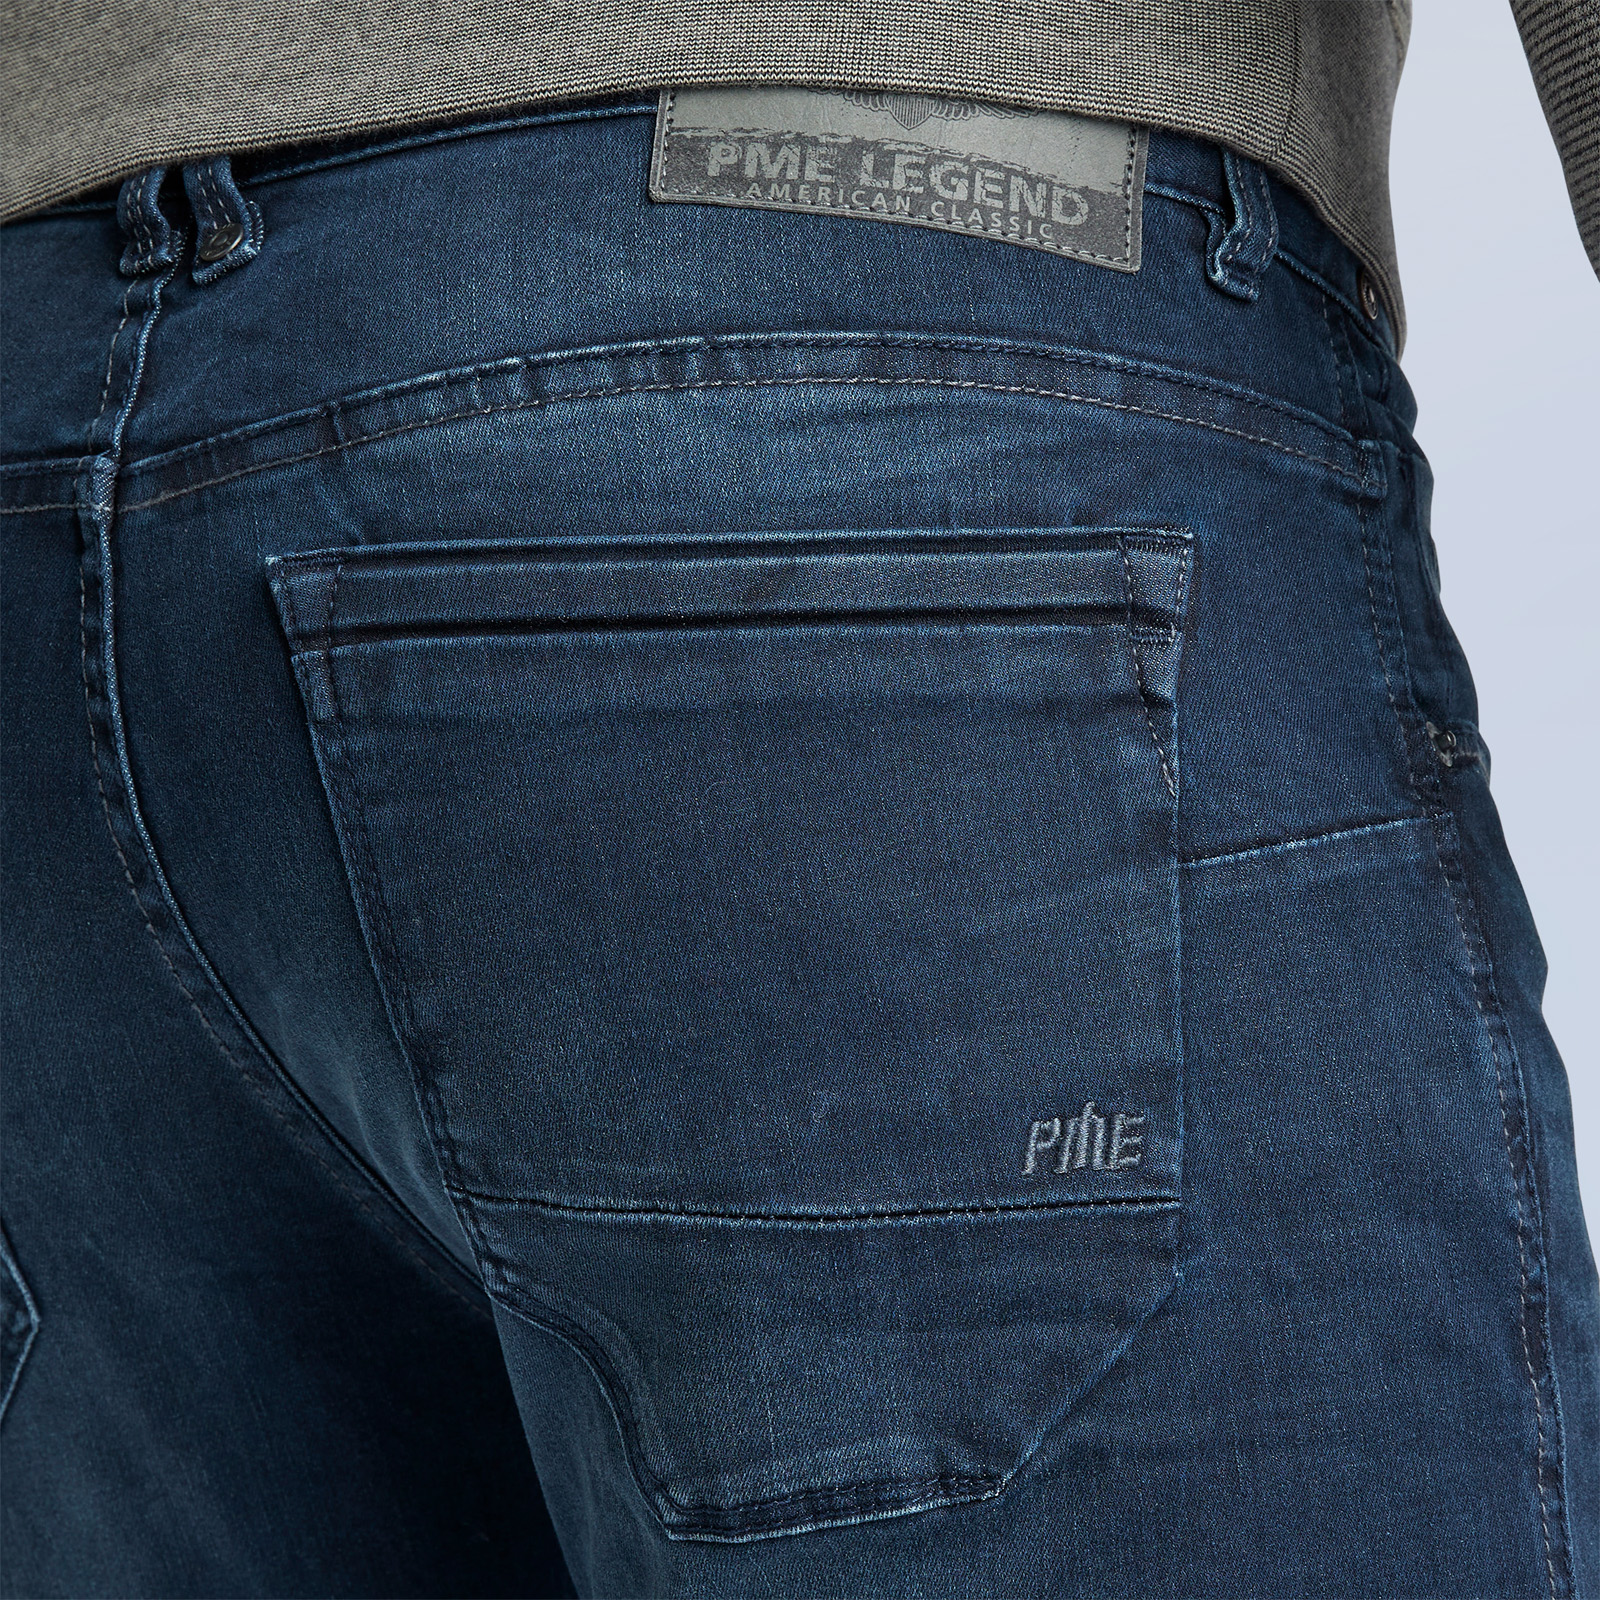 PME JEANS | PME Legend Jeans | Free shipping and returns